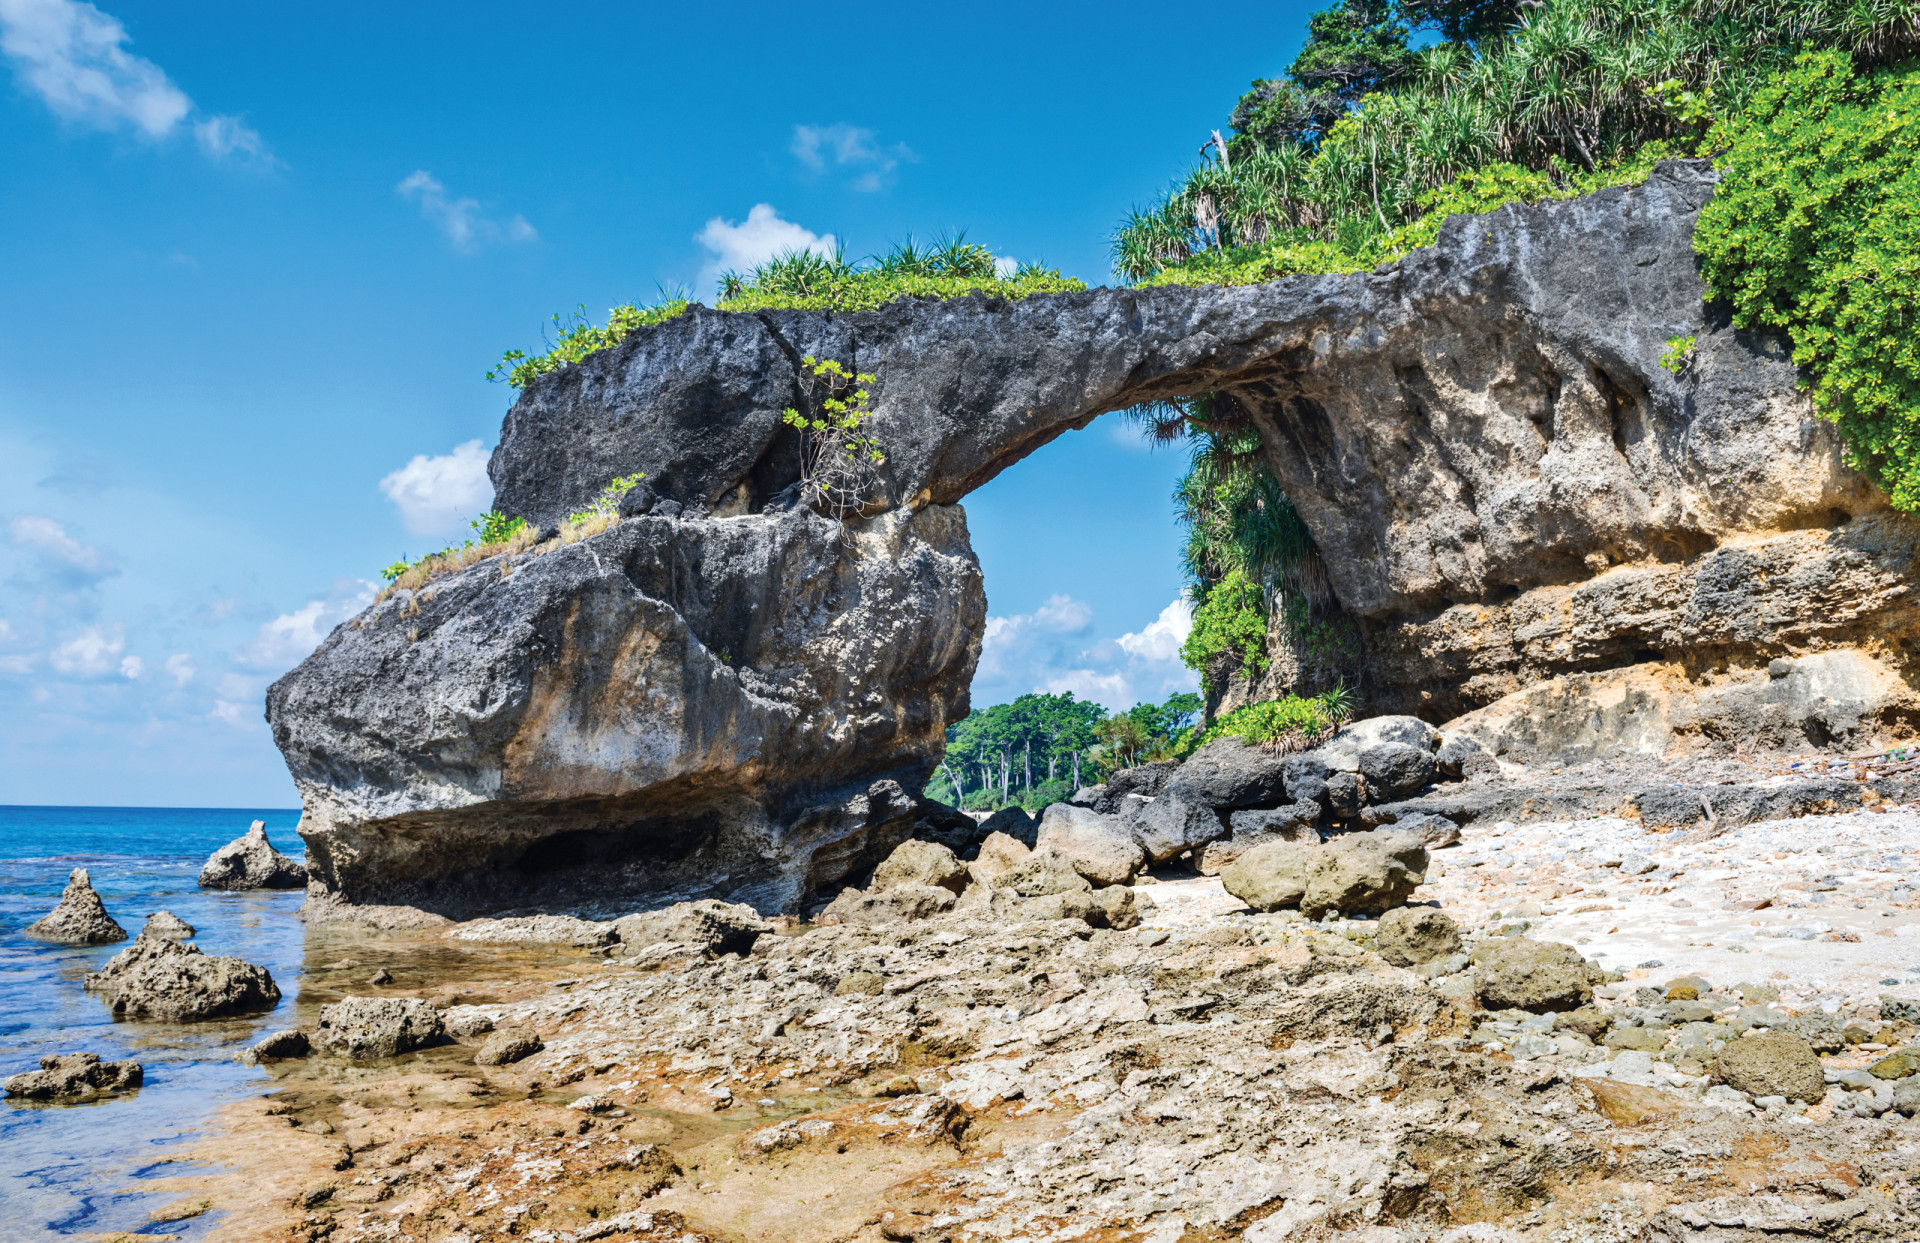 <p>Shaheed Dweep, previously known as Neil Island, is one of a cluster of small islands in Ritchie's Archipelago. The island is a low-key vacation destination easily explored by bicycle (it's that compact). The Hawrah Natural Bridge is a much photographed local landmark.</p><p>You may also like:<a href="https://www.starsinsider.com/n/393533?utm_source=msn.com&utm_medium=display&utm_campaign=referral_description&utm_content=689150en-nz"> Then and now: Hollywood's most iconic child stars</a></p>